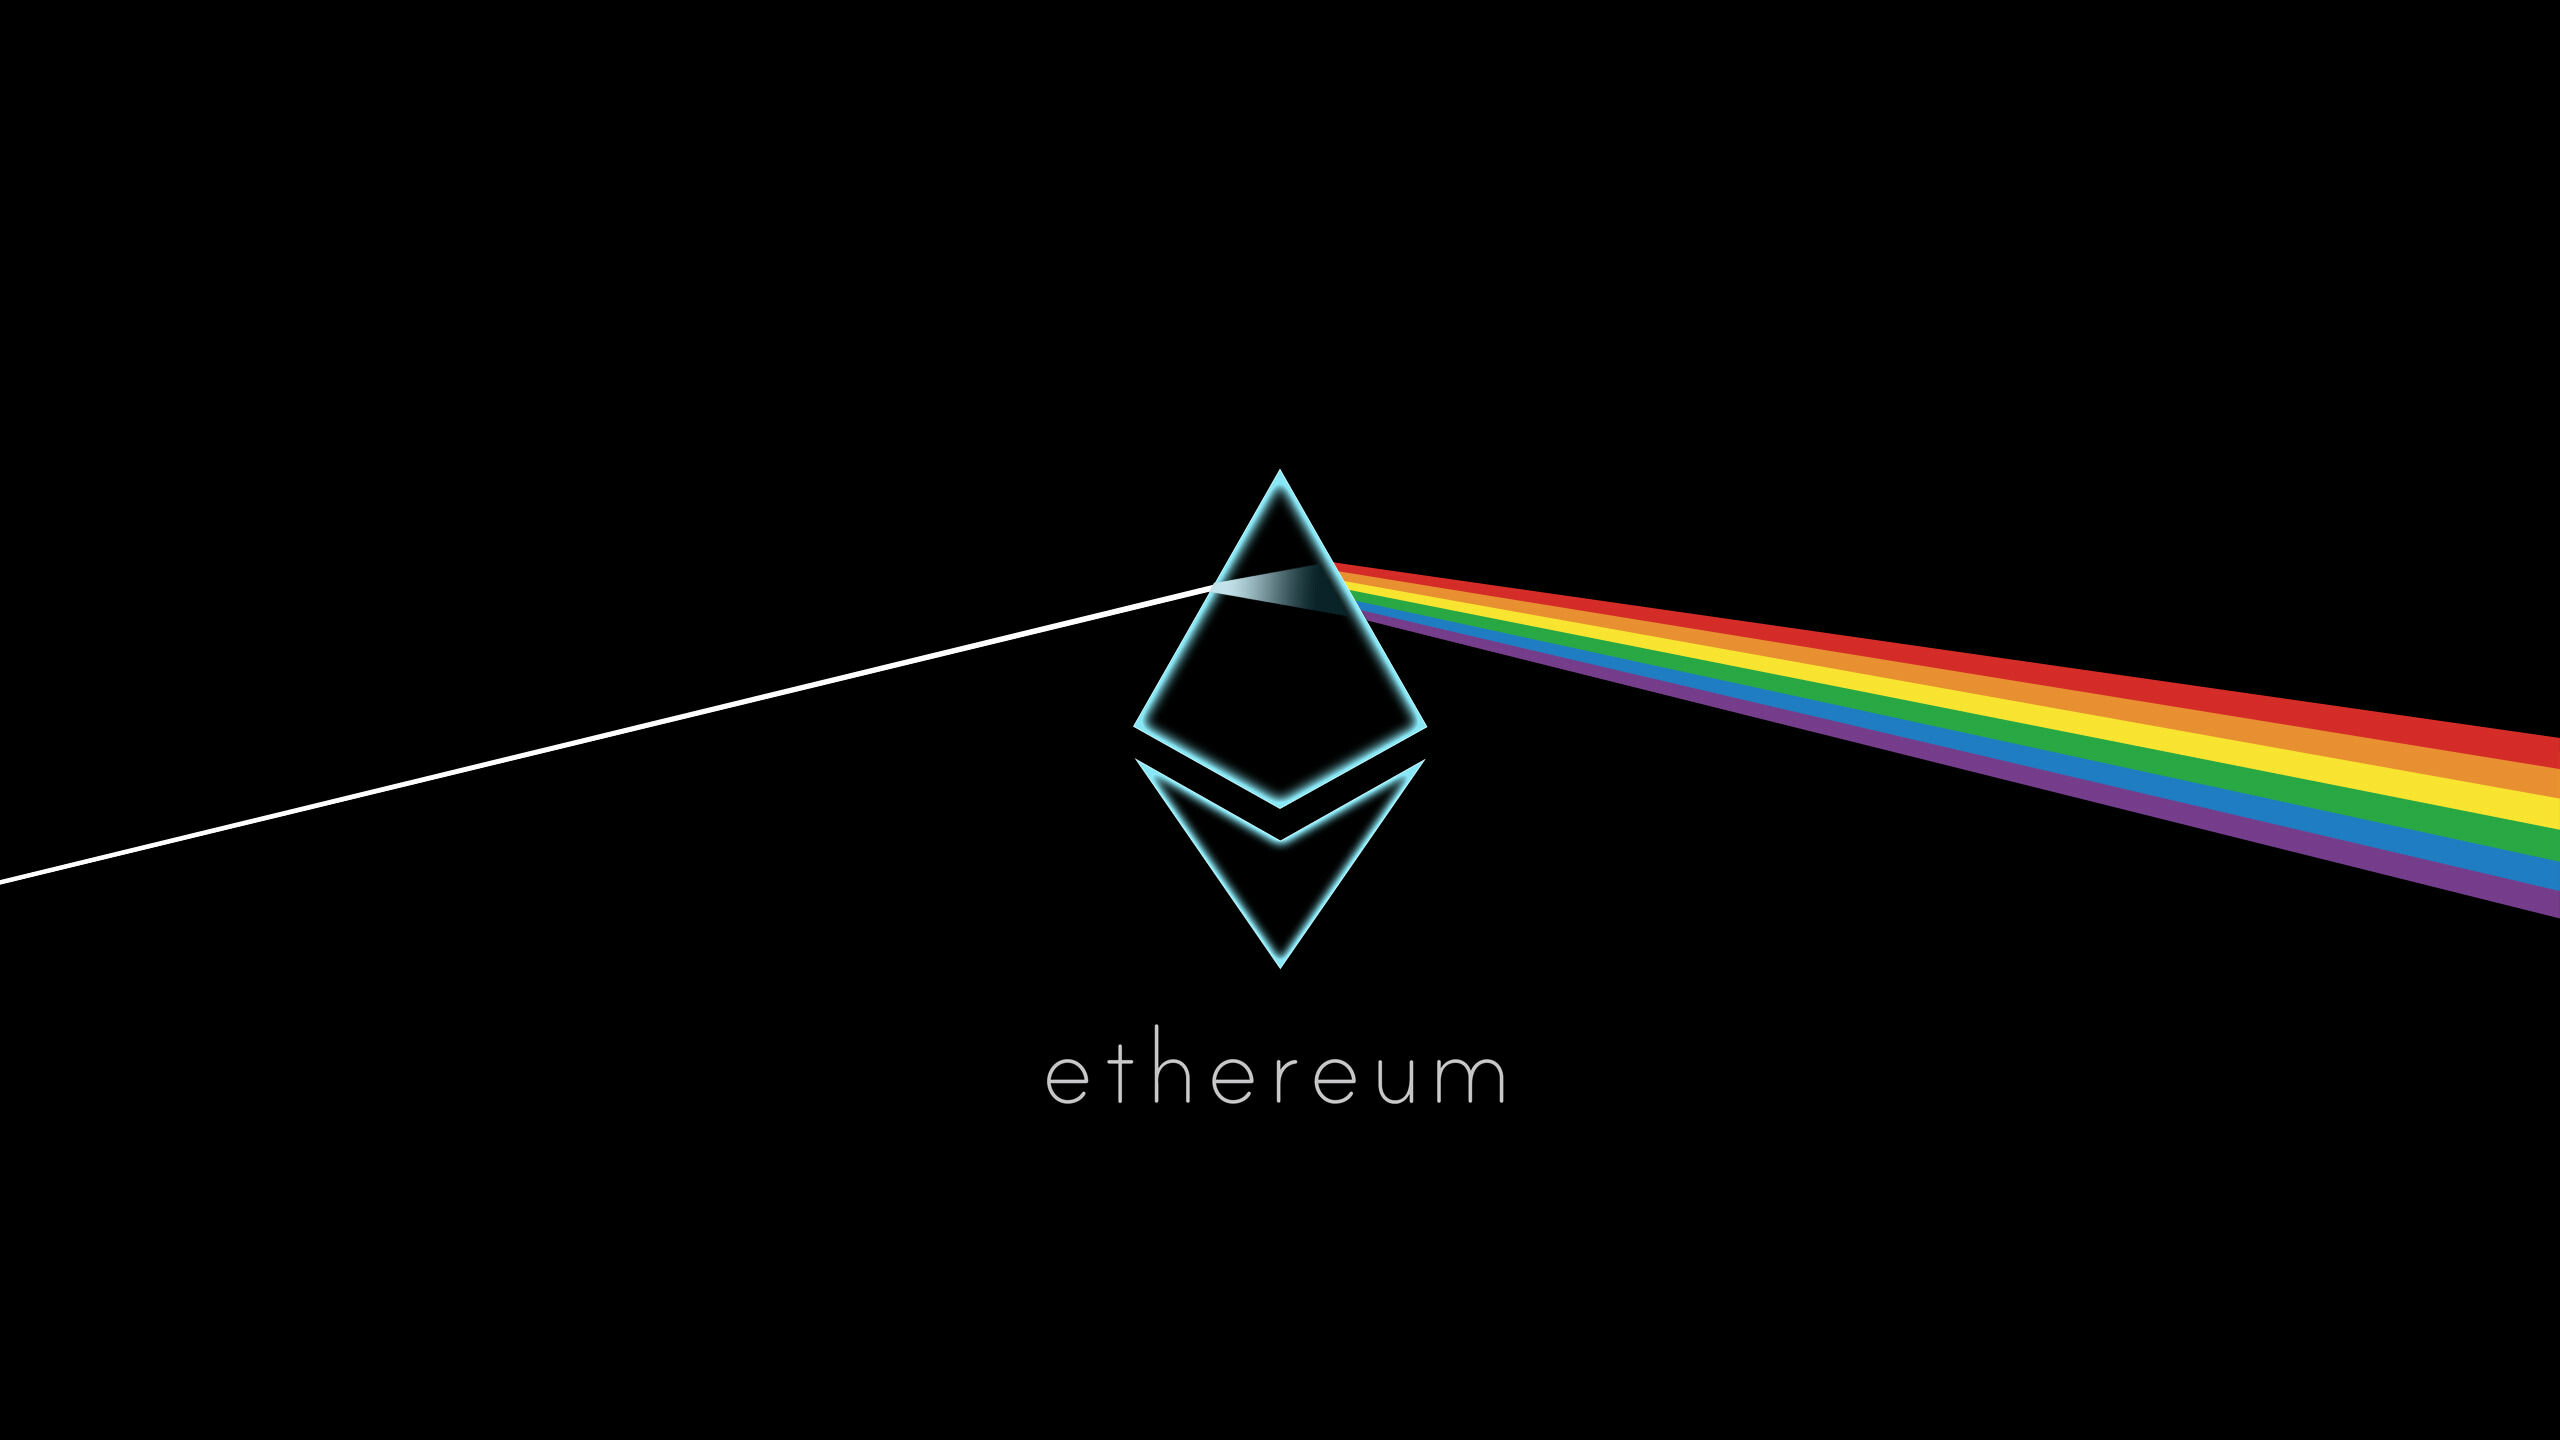 Cryptocurrency: ETH, Ethereum's native currency. 2560x1440 HD Wallpaper.